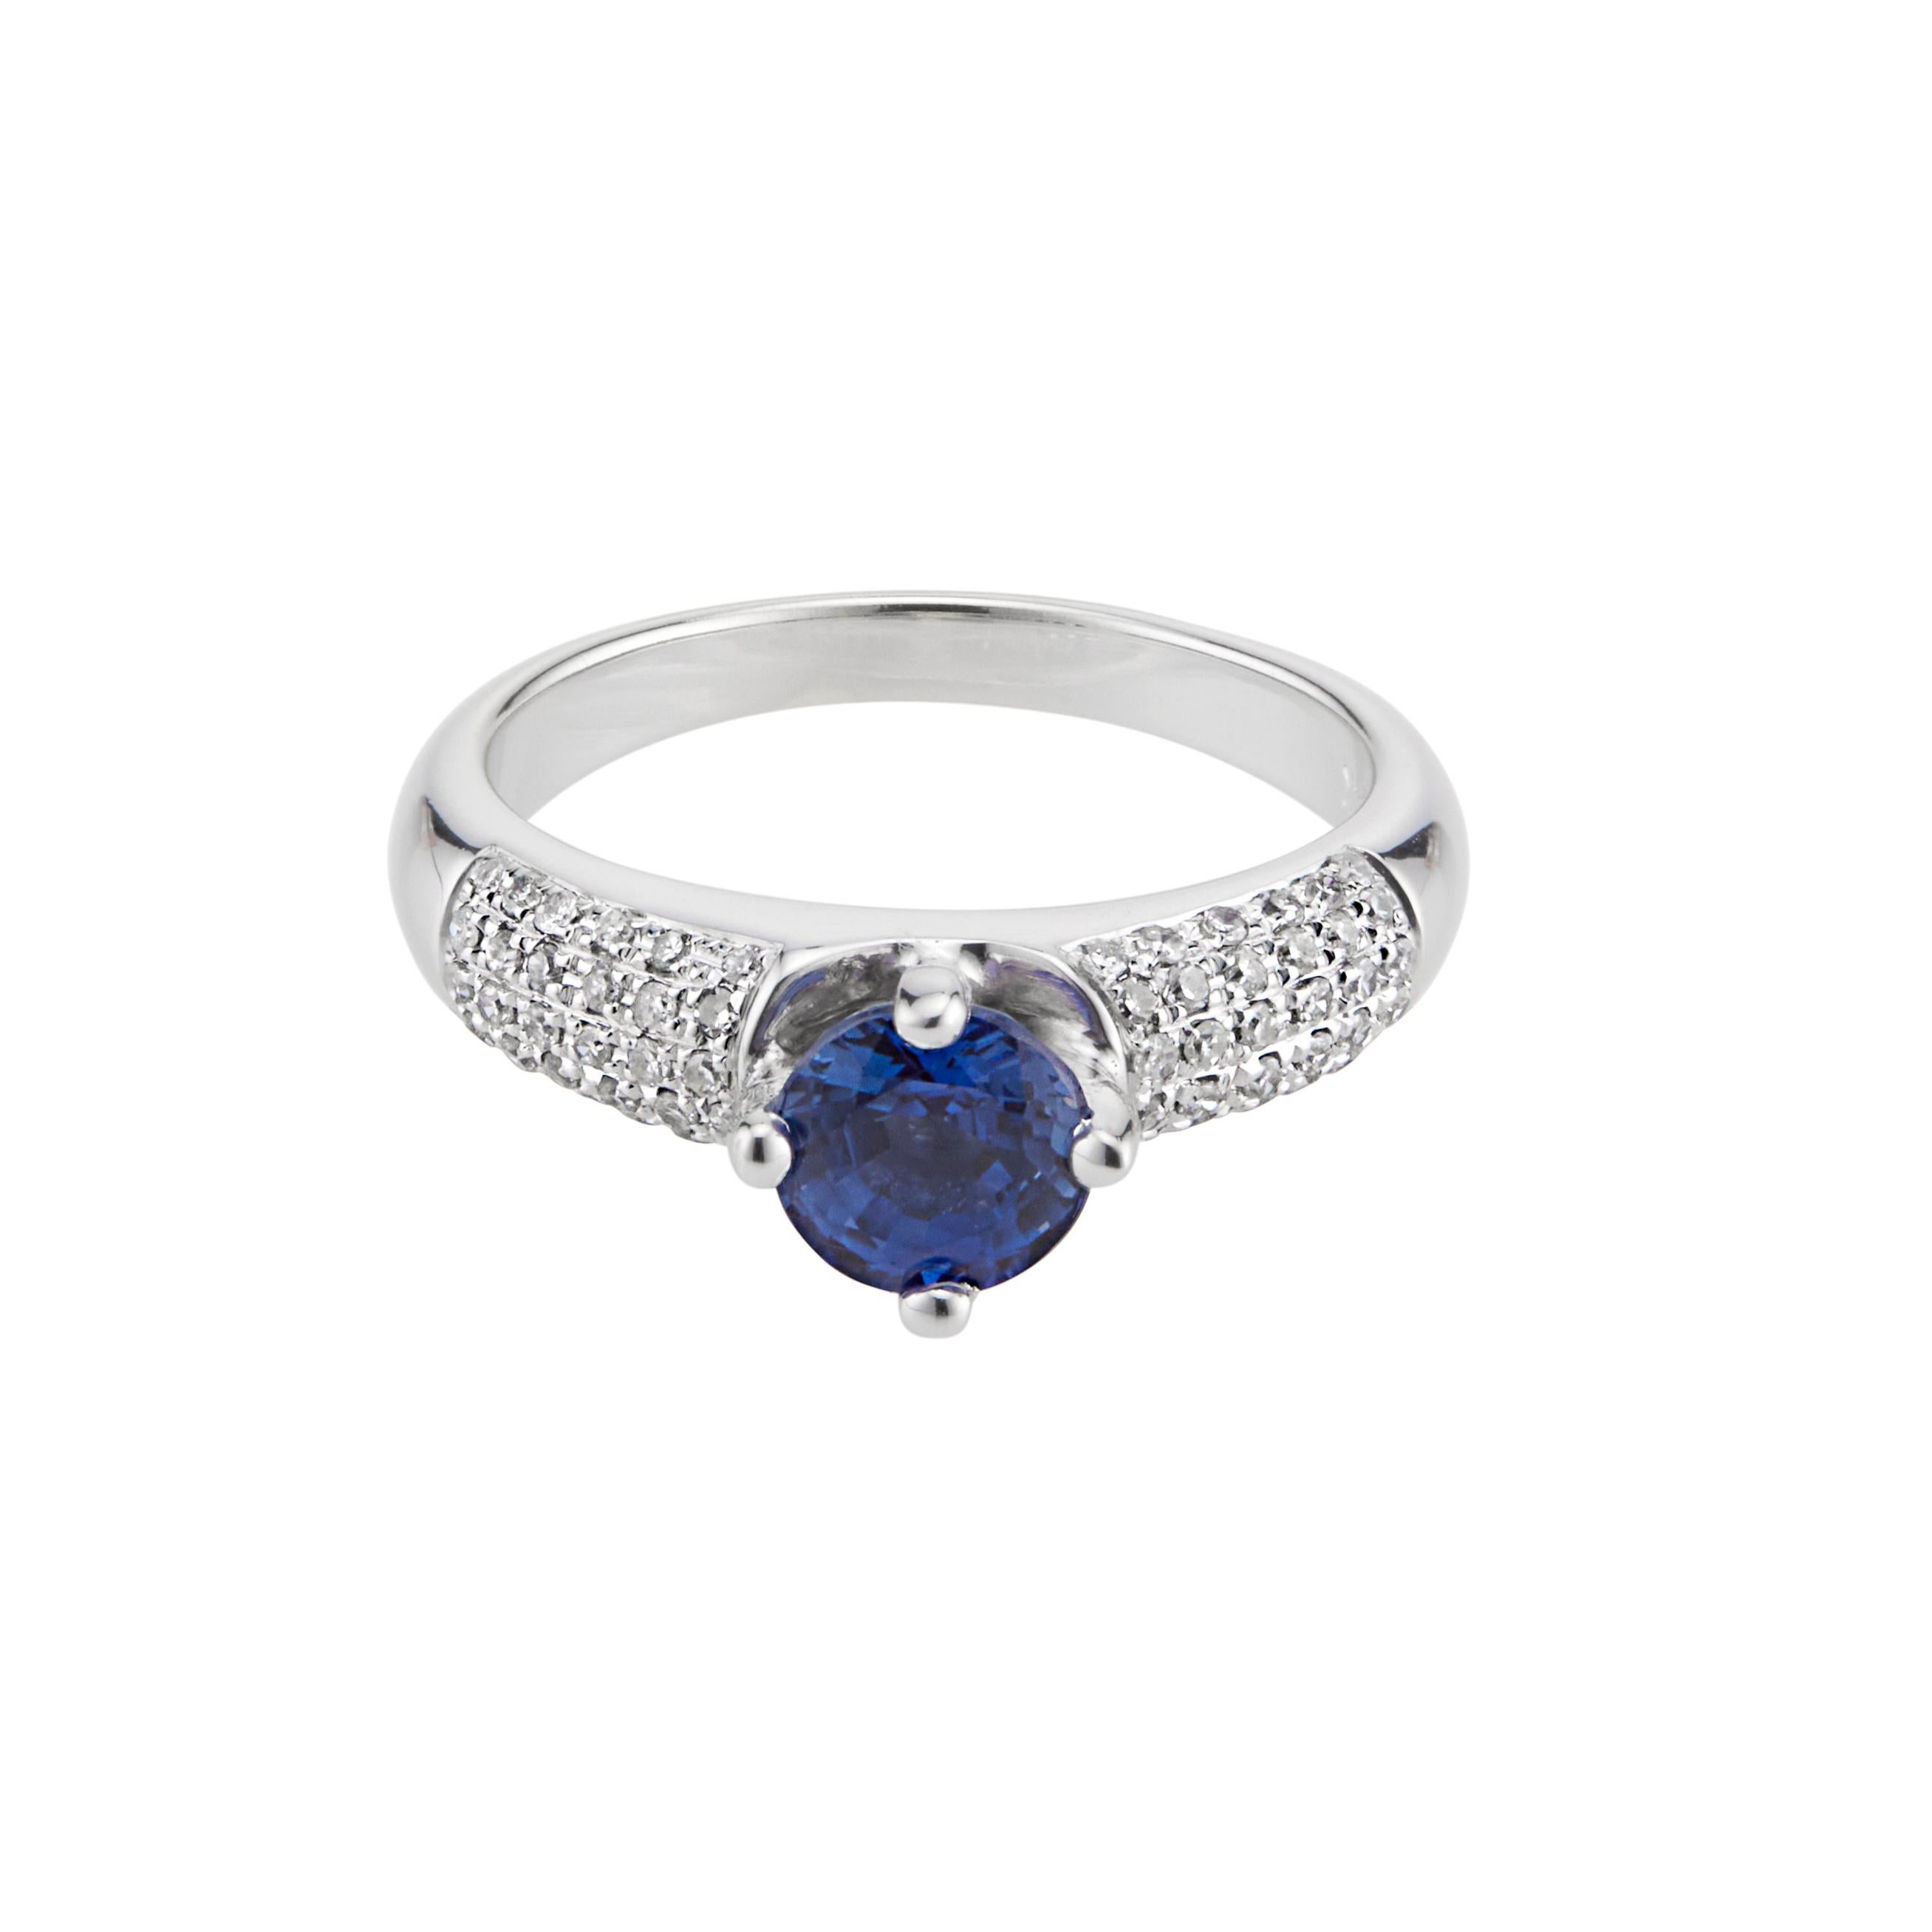 Sapphire and diamond engagement ring. Round bright blue center  sapphire set in diamond pave white gold engagement setting.  

1 round blue sapphire, SI approx. 1.00ct
60 single cut diamonds, I SI I approx.. .30cts
Size 6 and sizable 
14k white gold